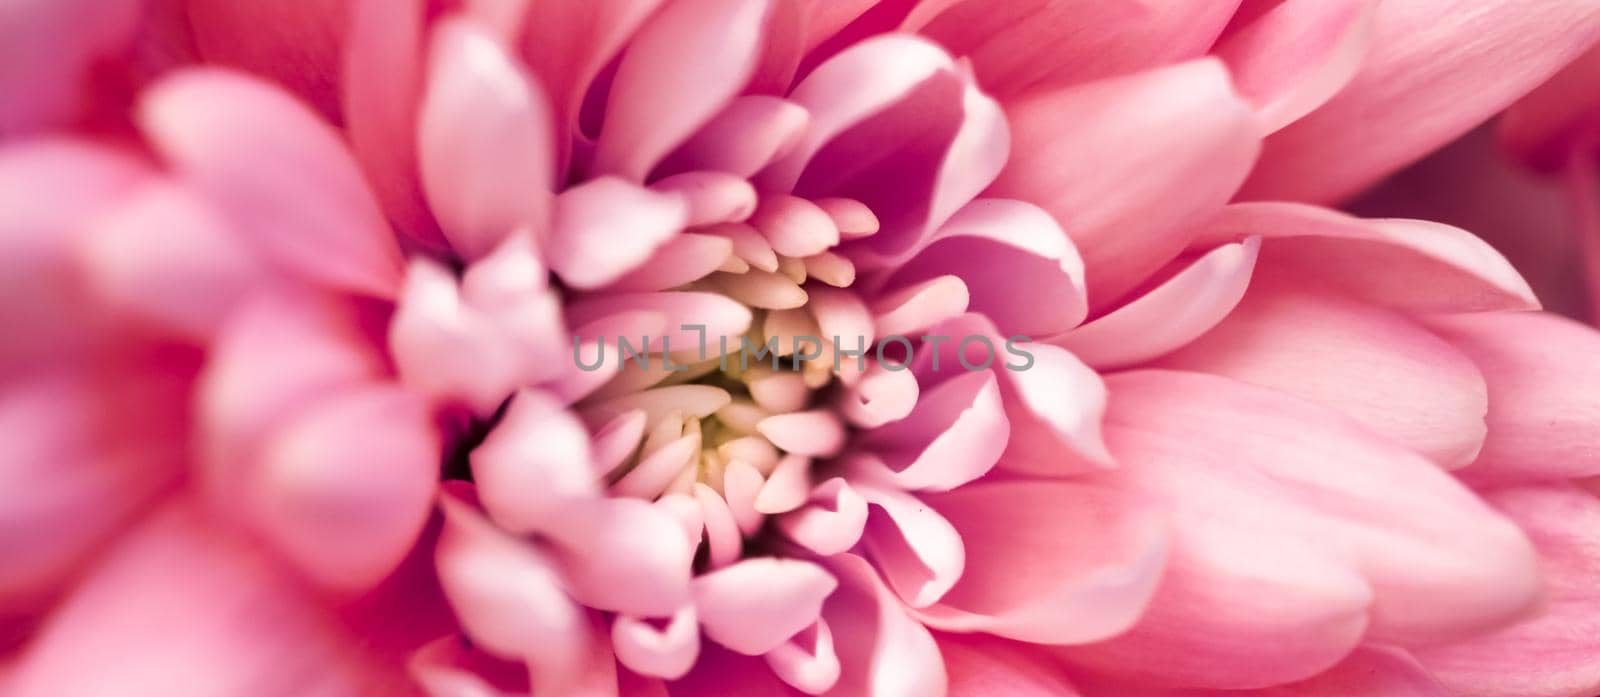 Coral daisy flower petals in bloom, abstract floral blossom art background, flowers in spring nature for perfume scent, wedding, luxury beauty brand holiday design by Anneleven